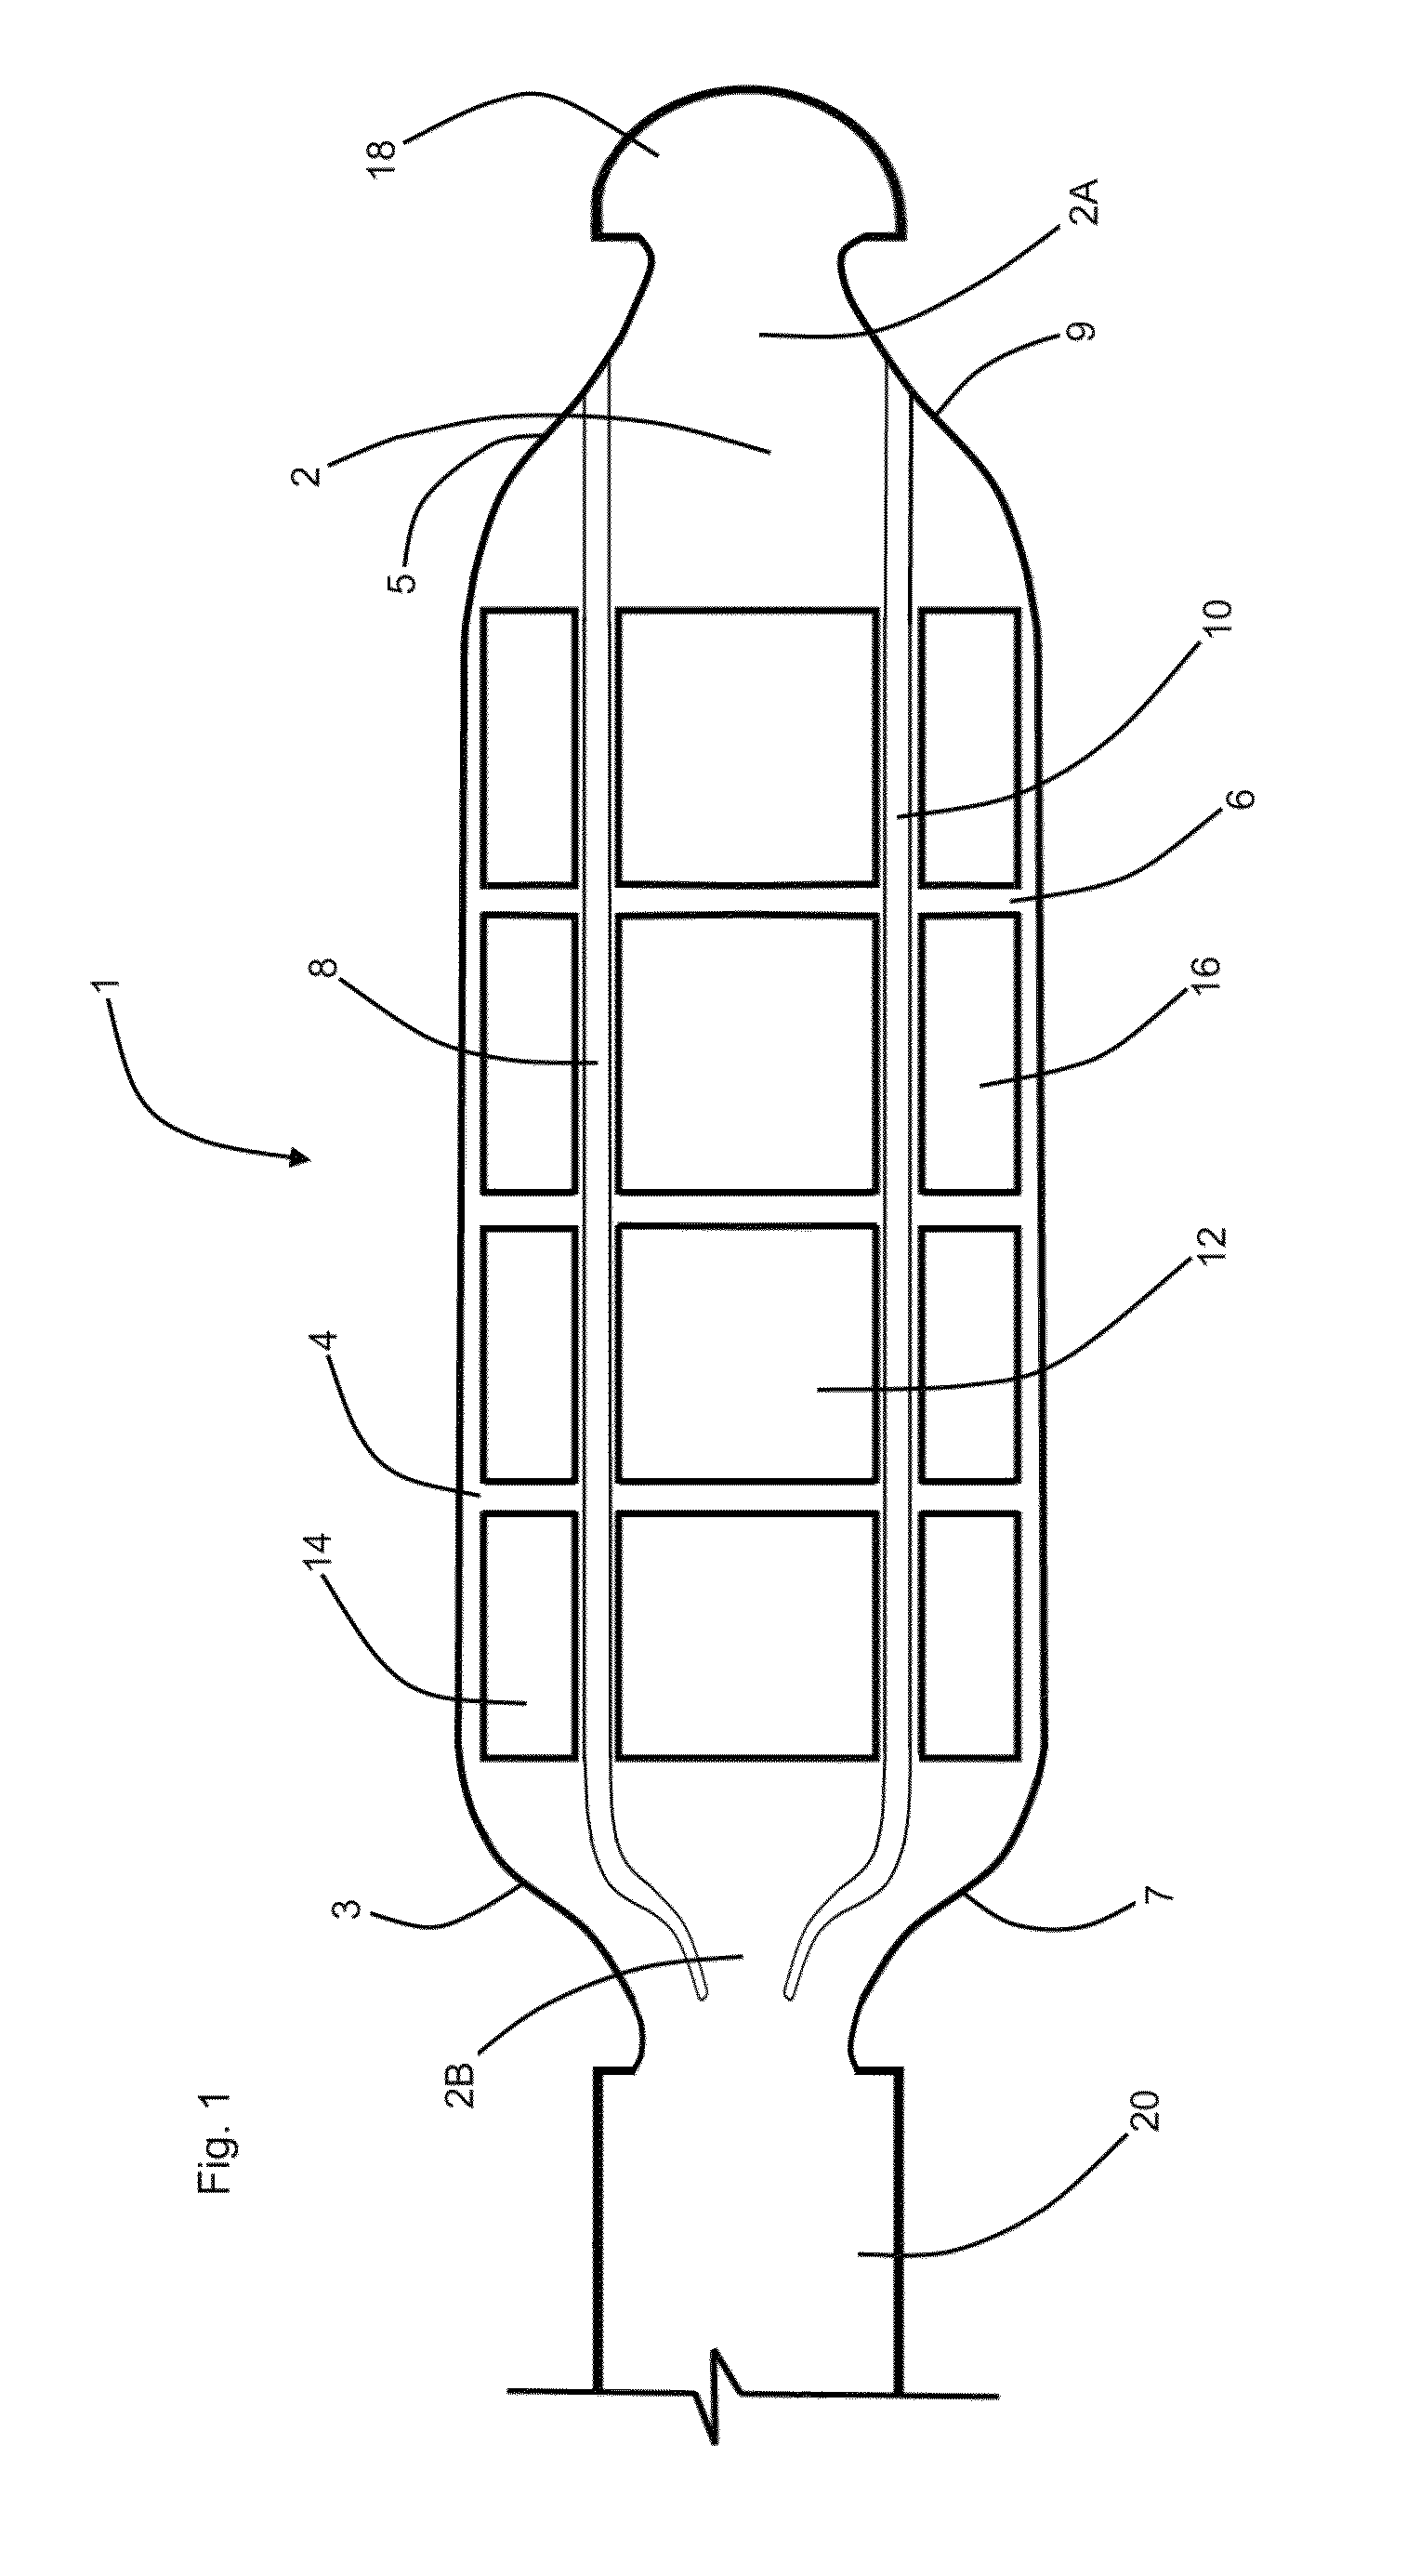 Assembly for pain suppressing electrical stimulation of a patient's spinal cord